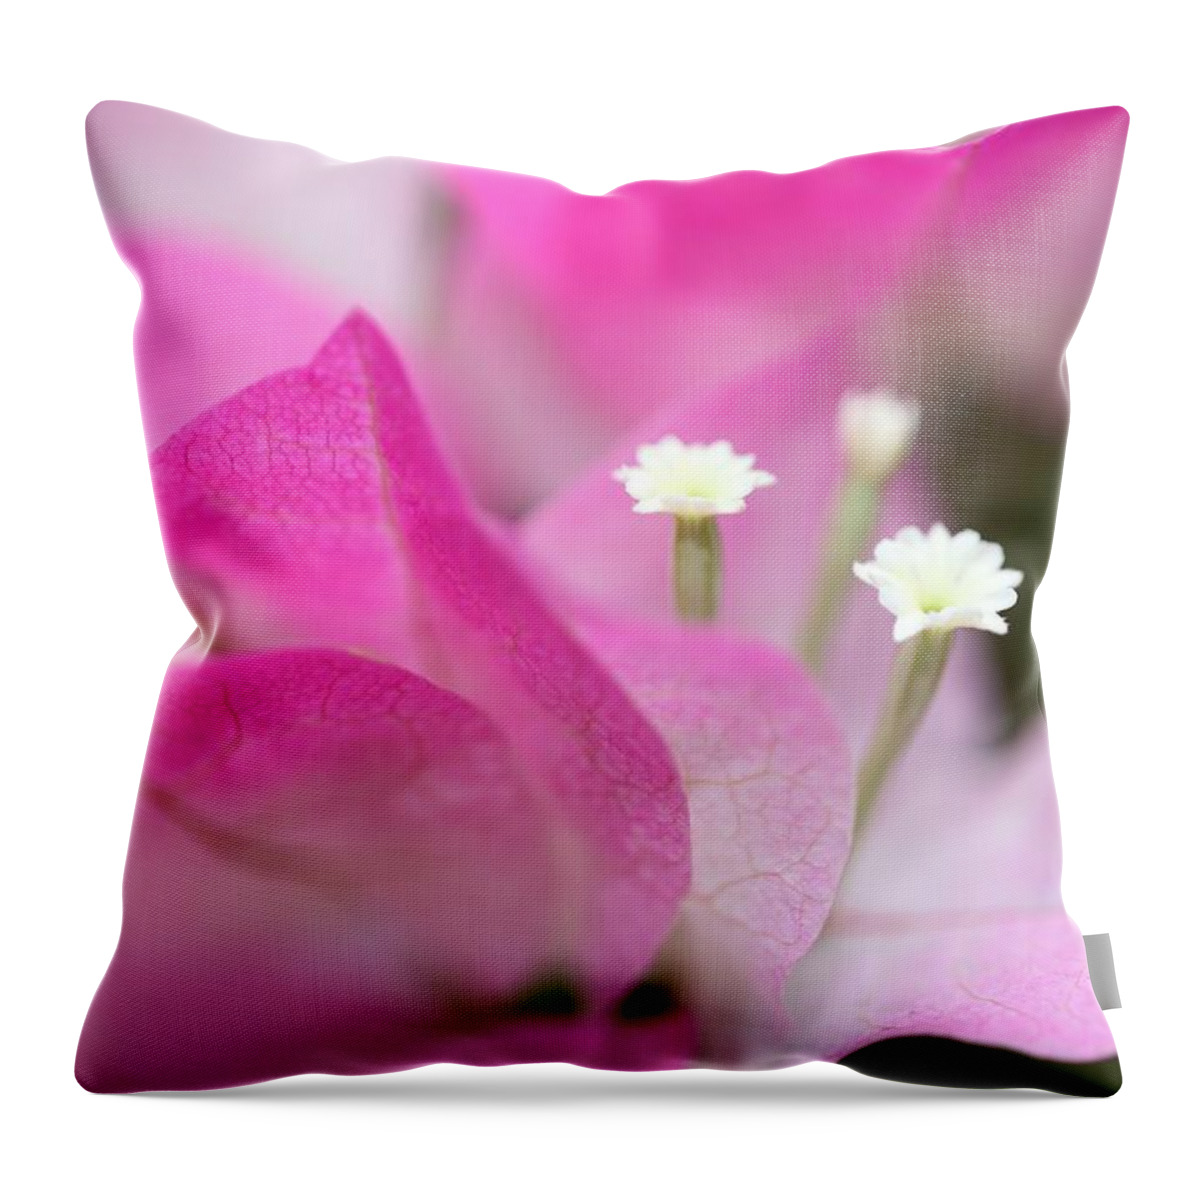 Bougainvillea Throw Pillow featuring the photograph Bougainvillea by Mingming Jiang